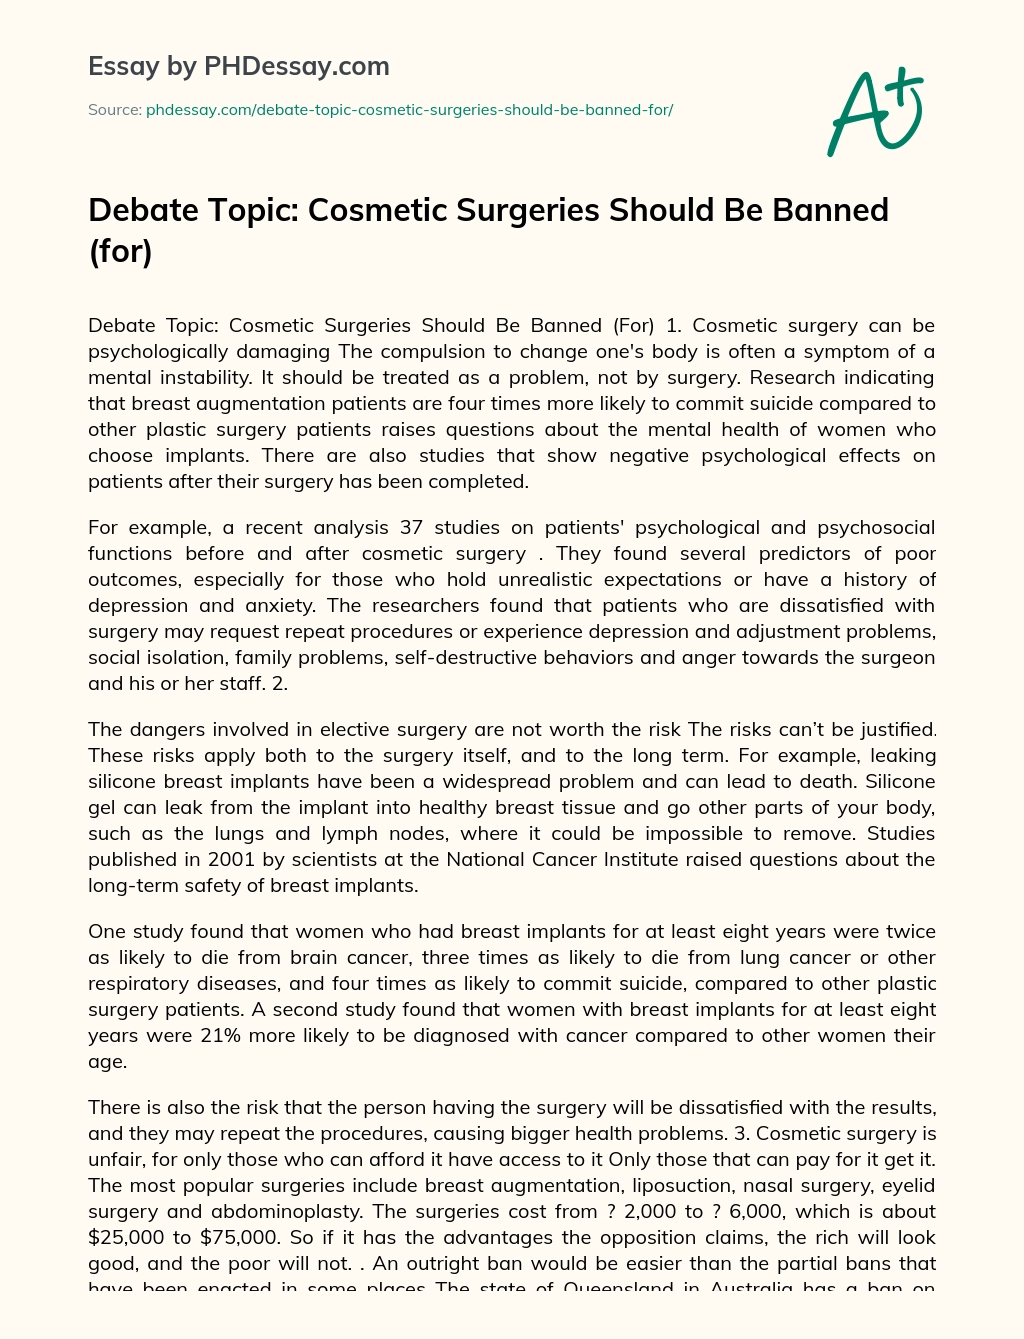 Debate Topic: Cosmetic Surgeries Should Be Banned (for) essay